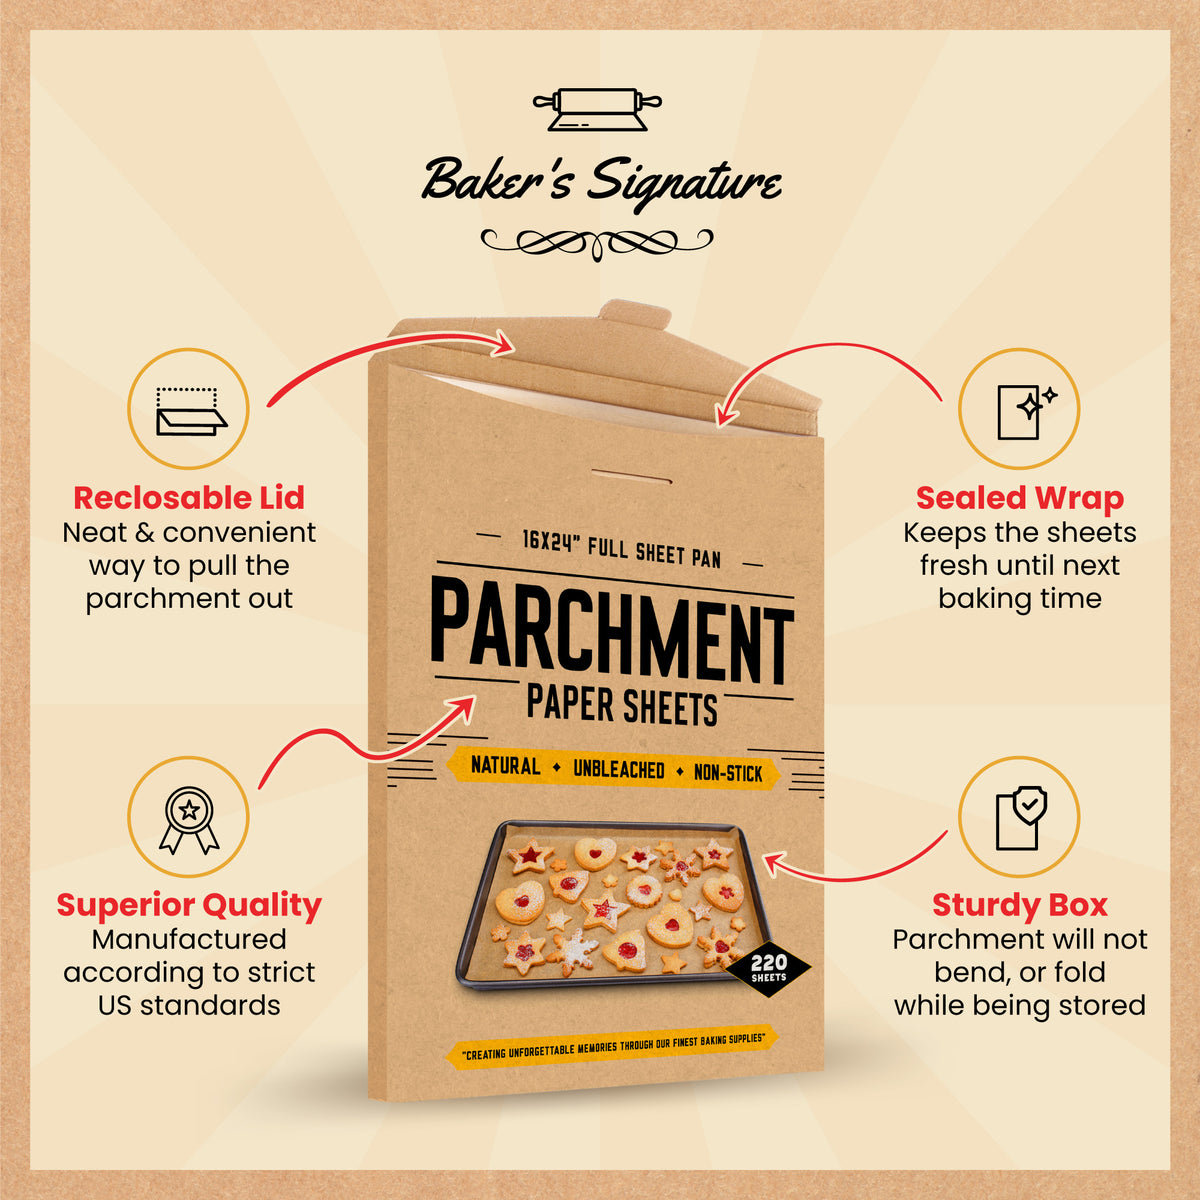 Silicone Parchment Paper Sheets - 16 x 24, Full Pan